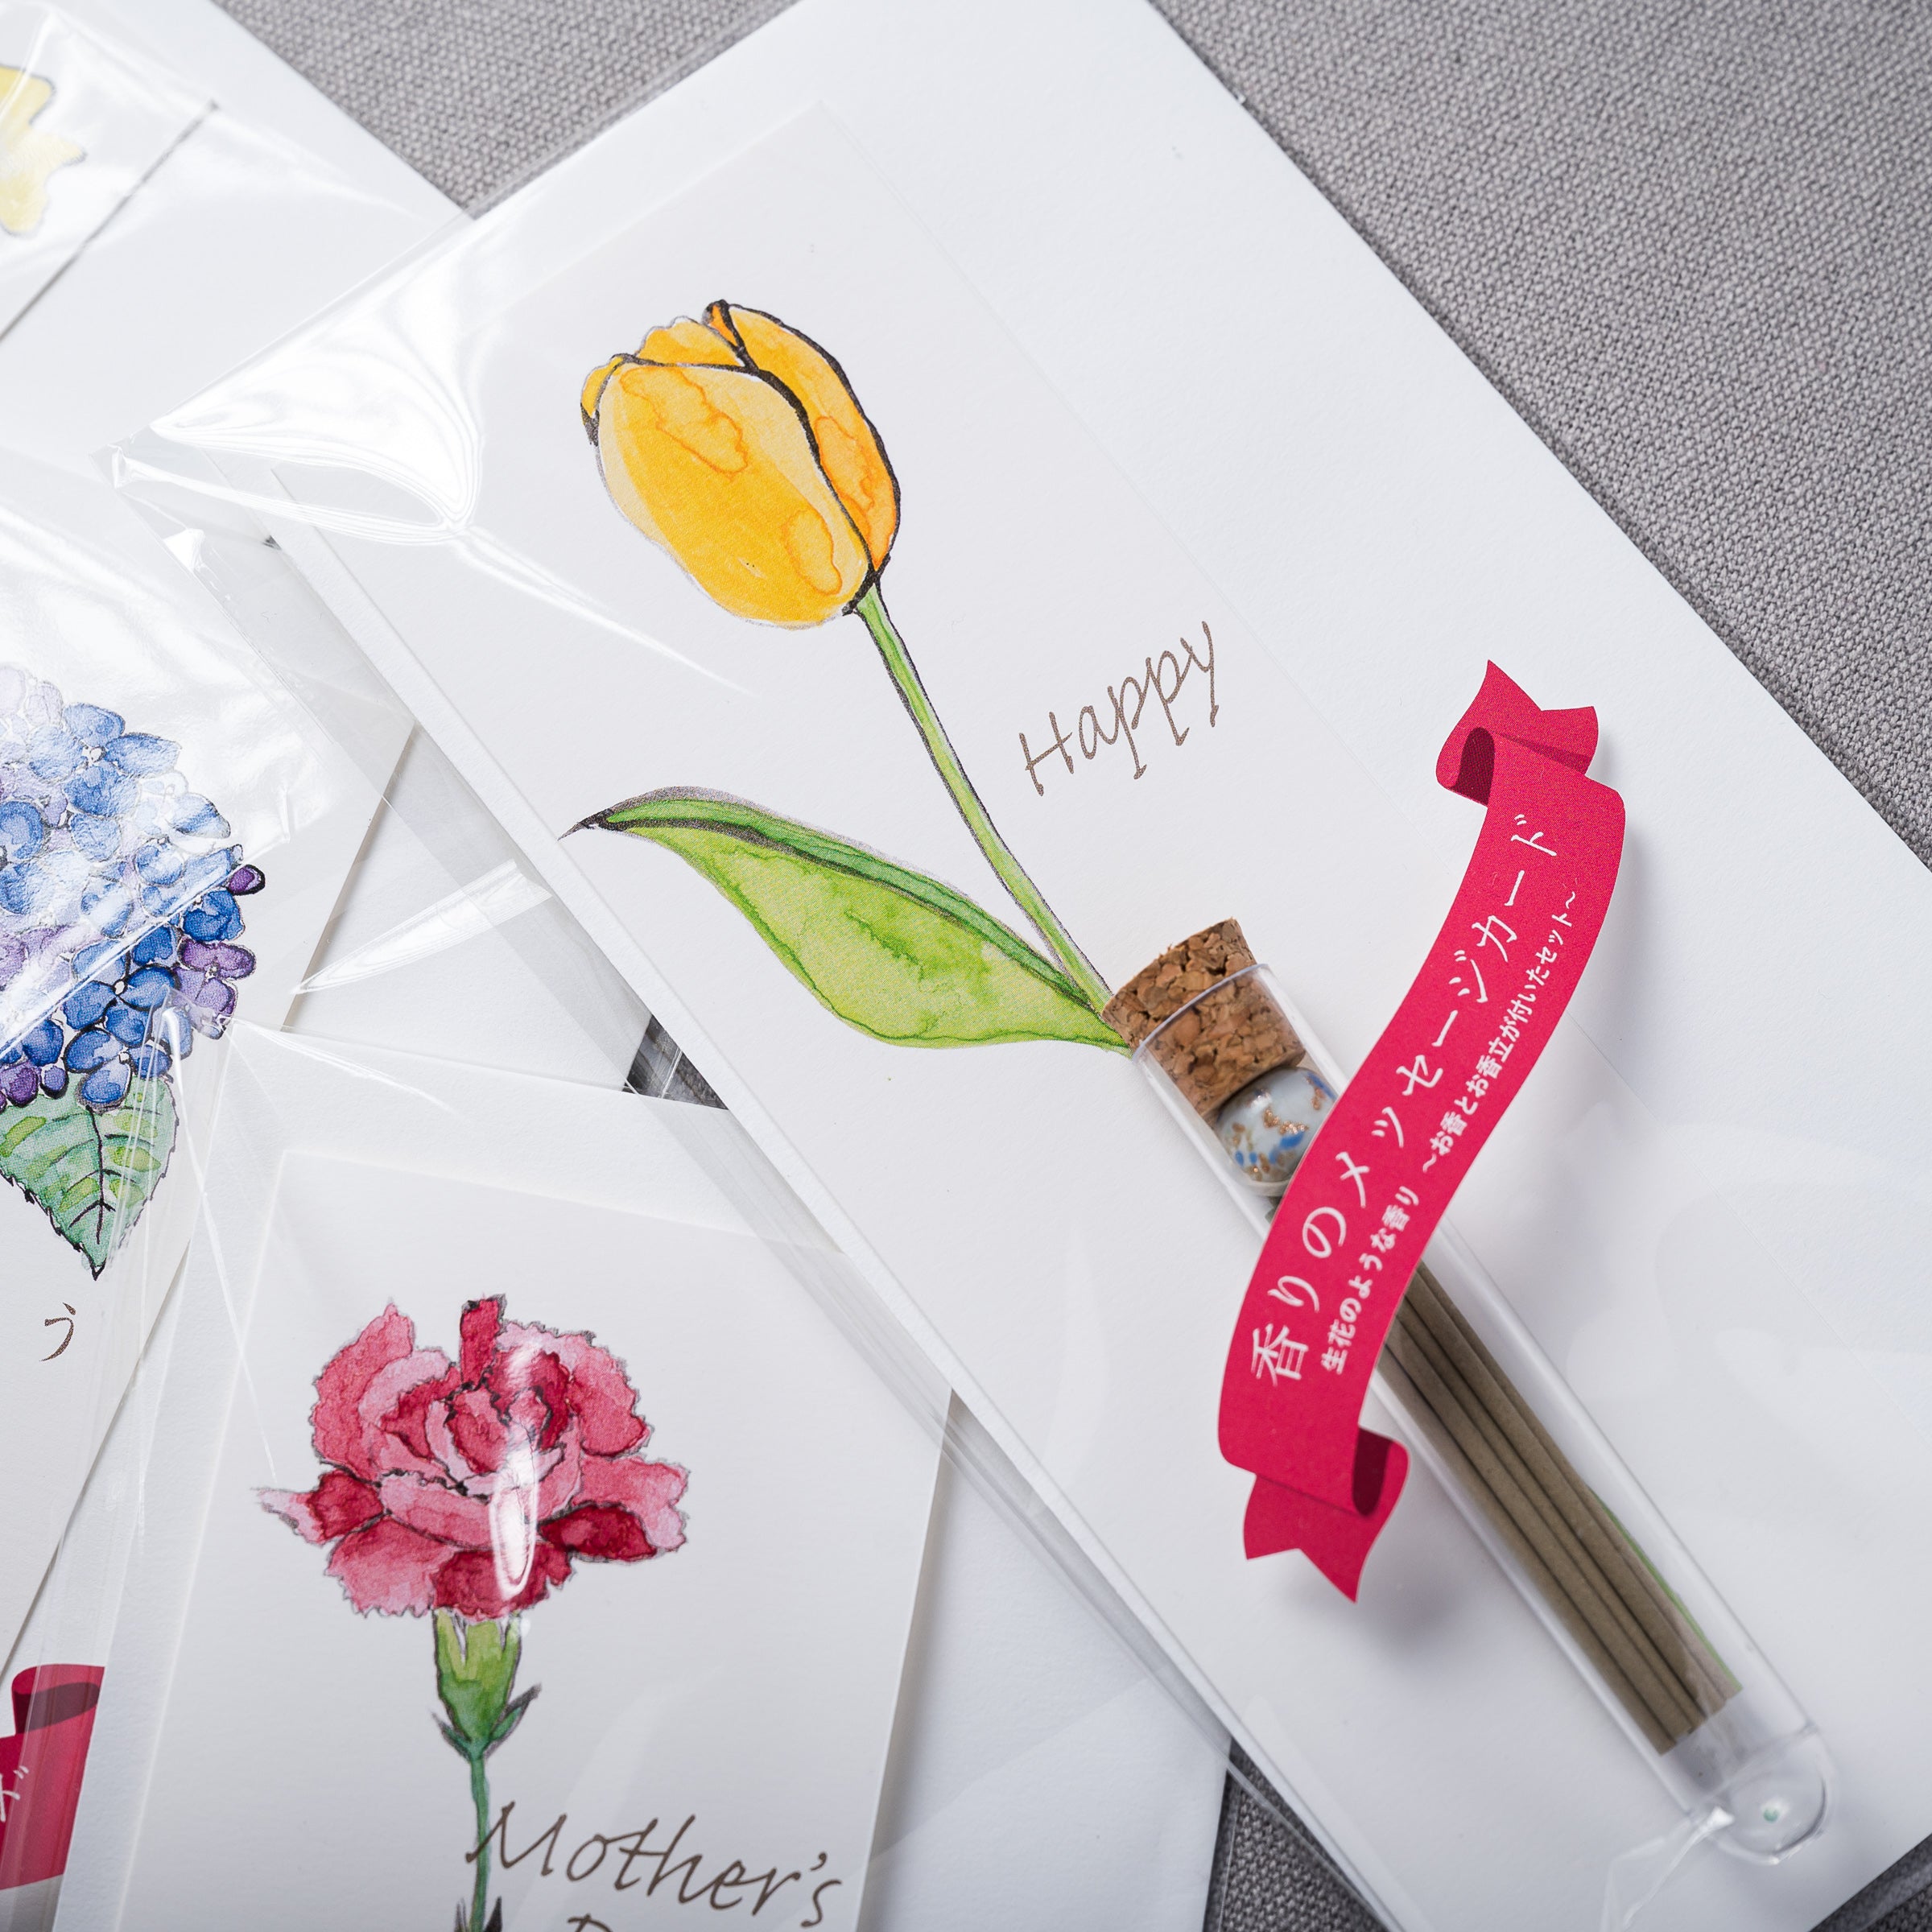 Incense Greeting Card - 5 Messages / 香立付メッセージお香